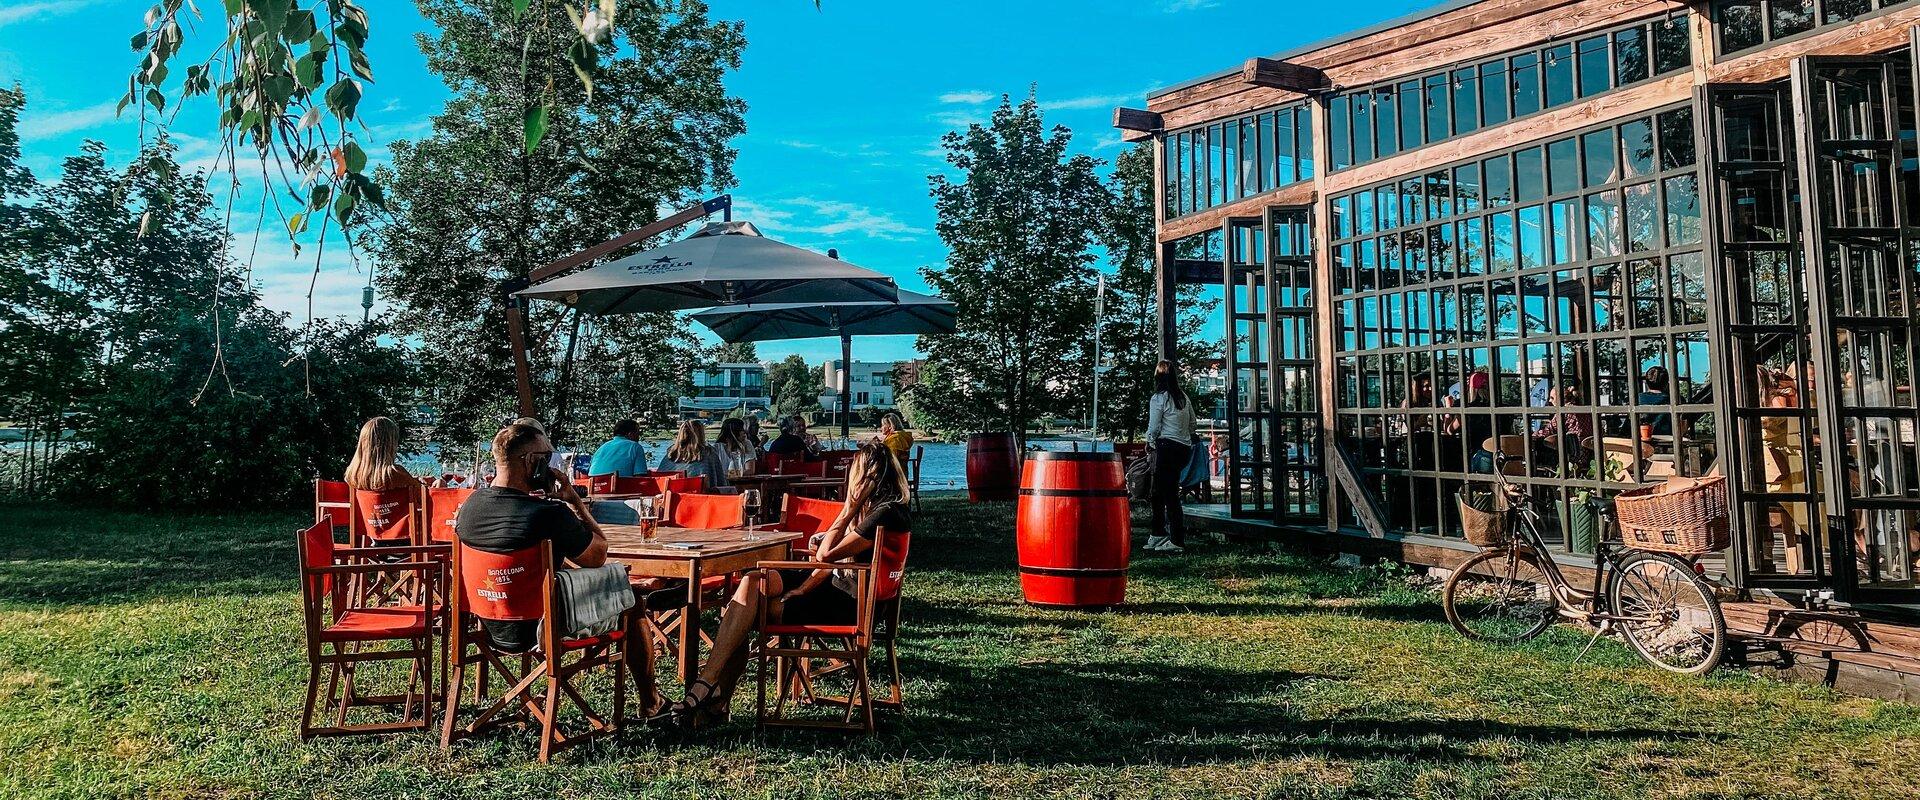 Enjoy a piece of Catalonia by River Pärnu! The tapas and sangria bar Baarcelona brings you the best flavour experiences from under the hot Mediterrane